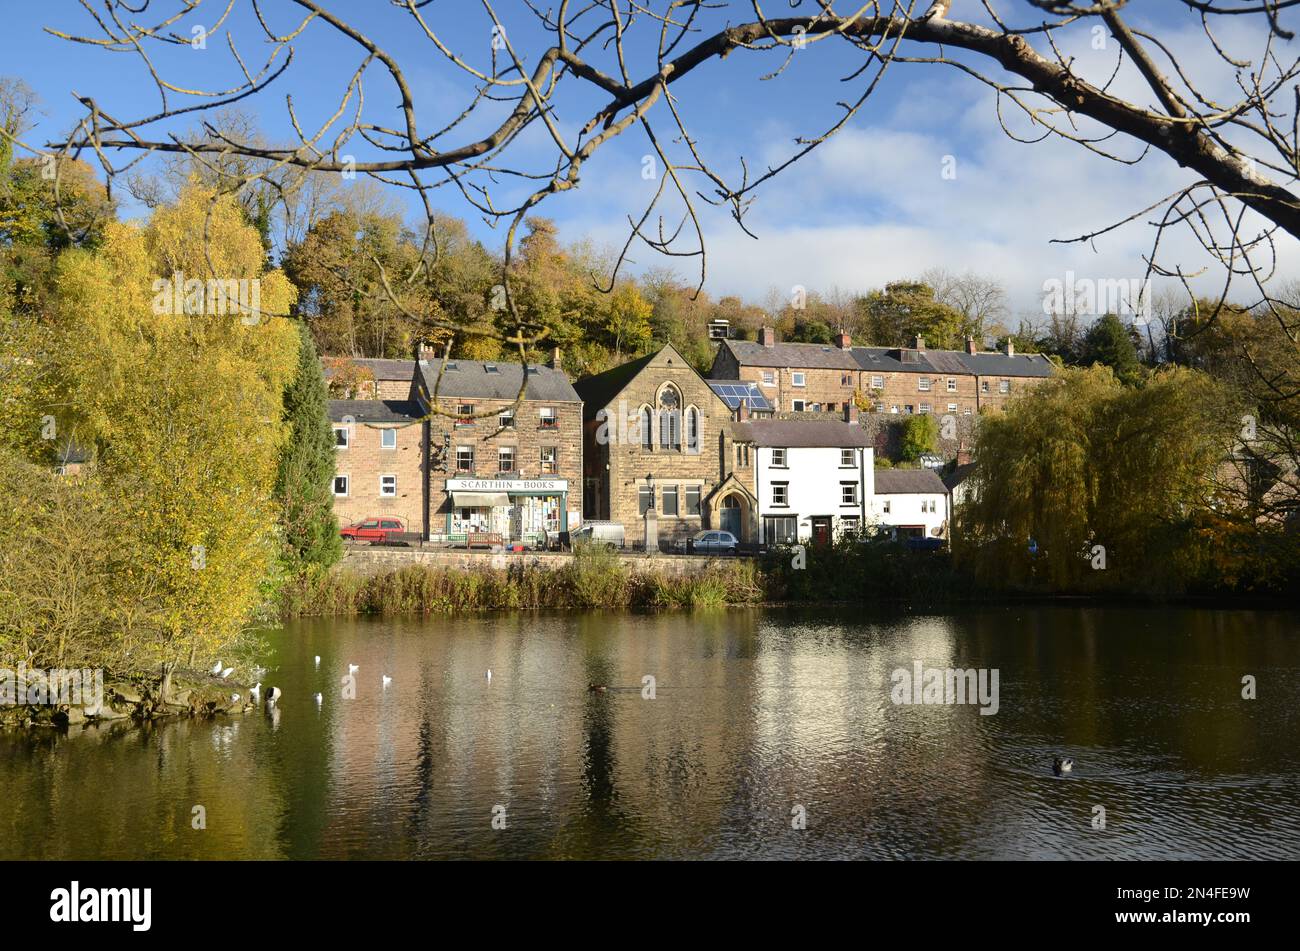 Looking accross Cromford mill pond towards Scarthin, Derbyshire, England Stock Photo